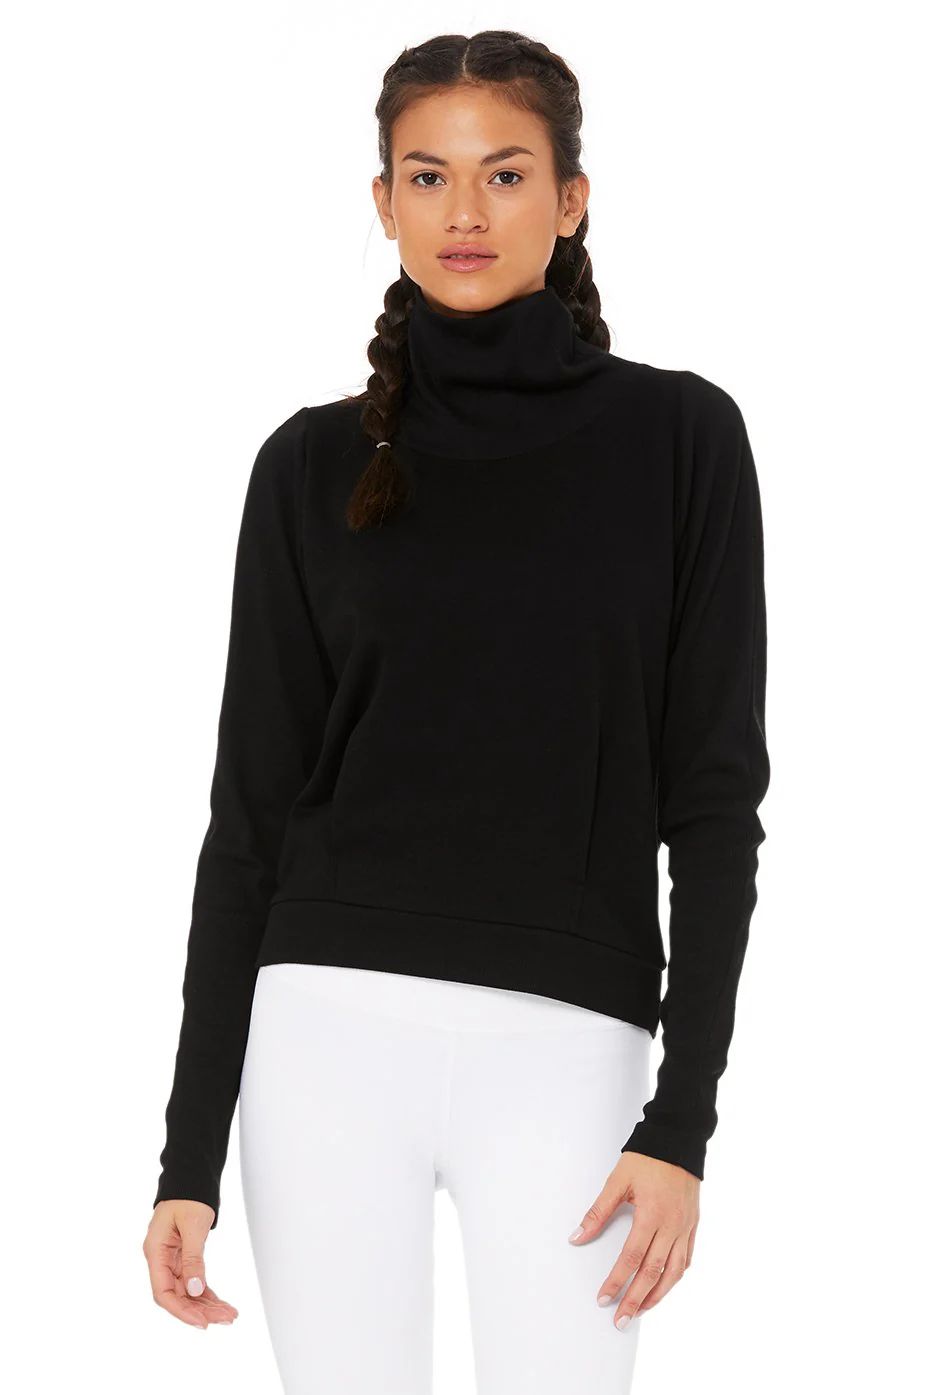 Alo YogaÂ® | Clarity Long Sleeve Top in Black, Size: XS | Alo Yoga